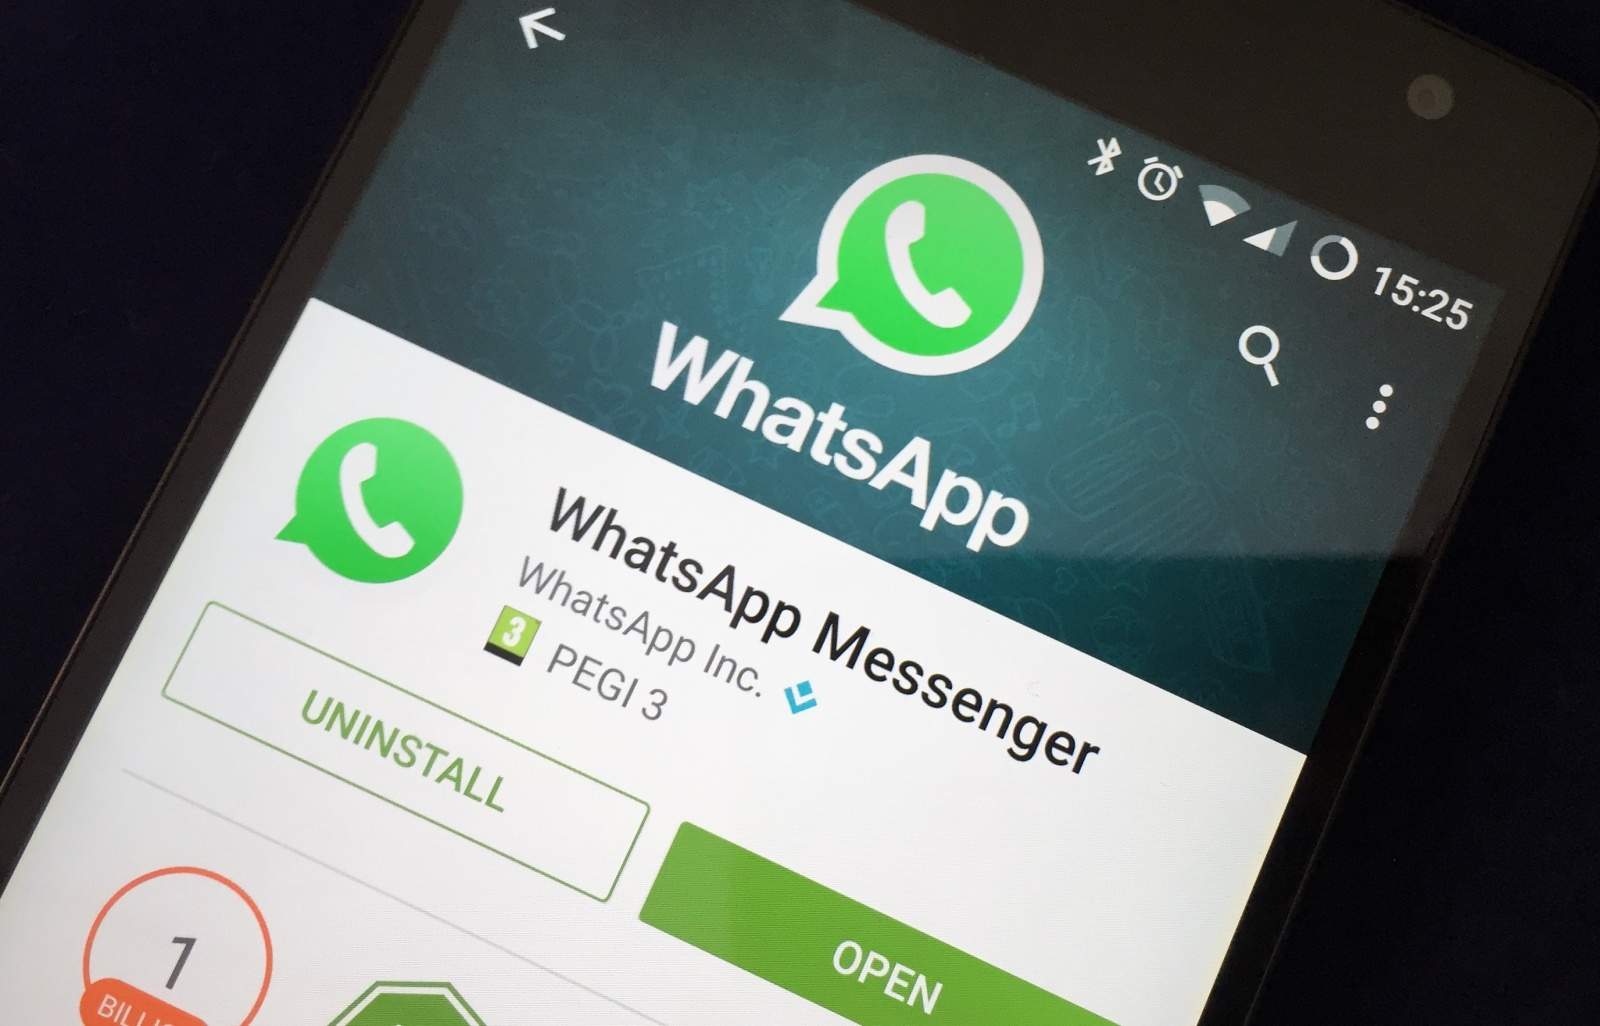 Why an Individual need to do tracking on WhatsApp account